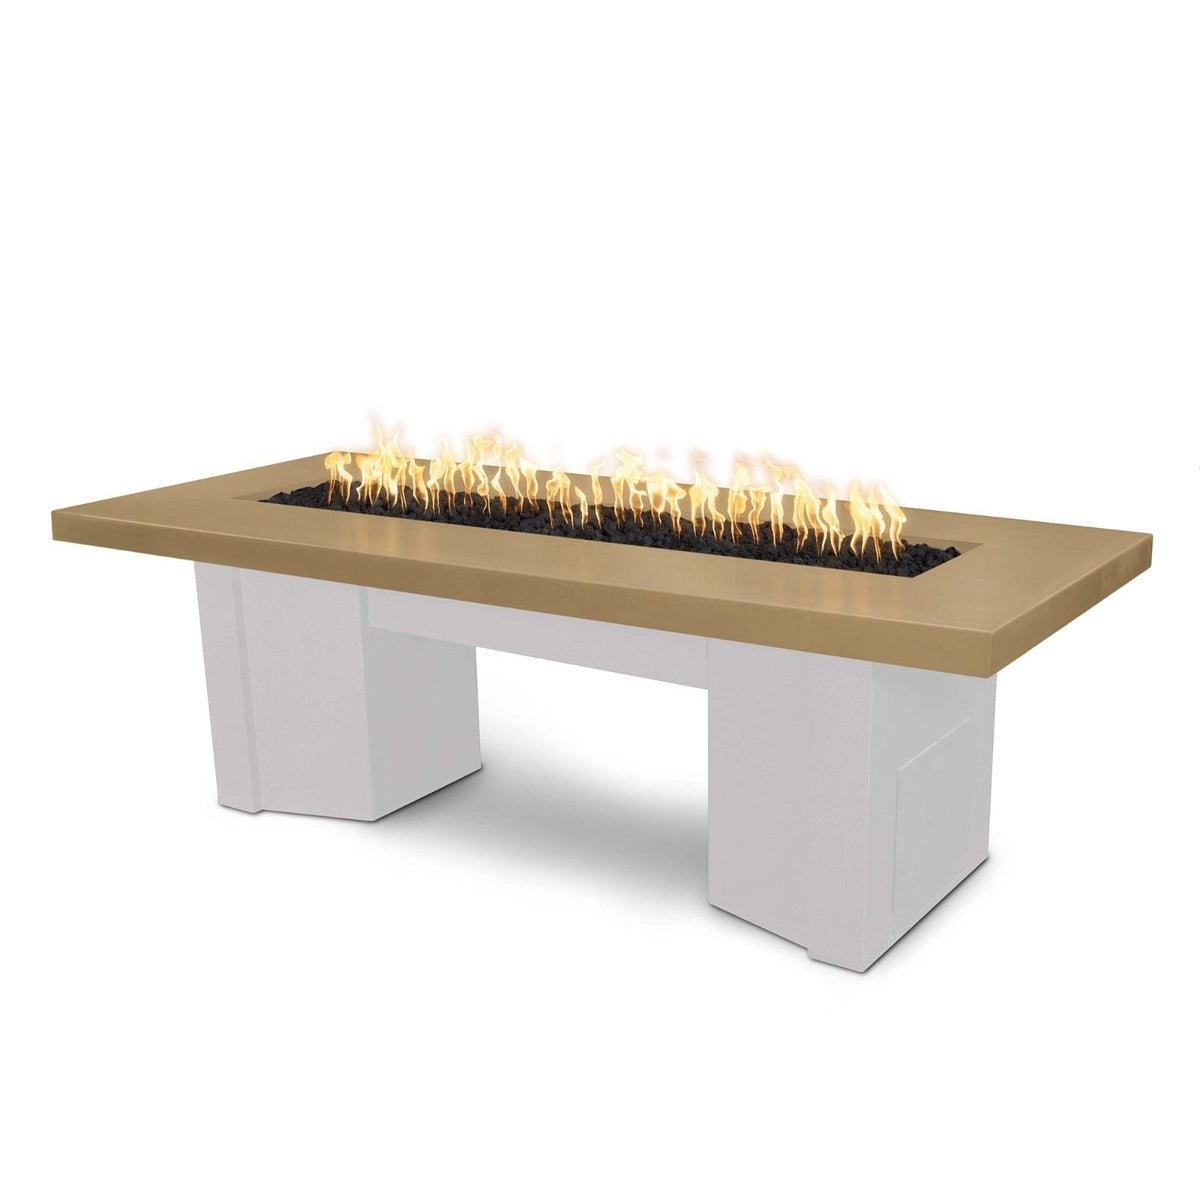 The Outdoor Plus Fire Features Brown (-BRN) / White Powder Coated Steel (-WHT) The Outdoor Plus 78&quot; Alameda Fire Table Smooth Concrete in Liquid Propane - Flame Sense System with Push Button Spark Igniter / OPT-ALMGFRC78FSEN-LP